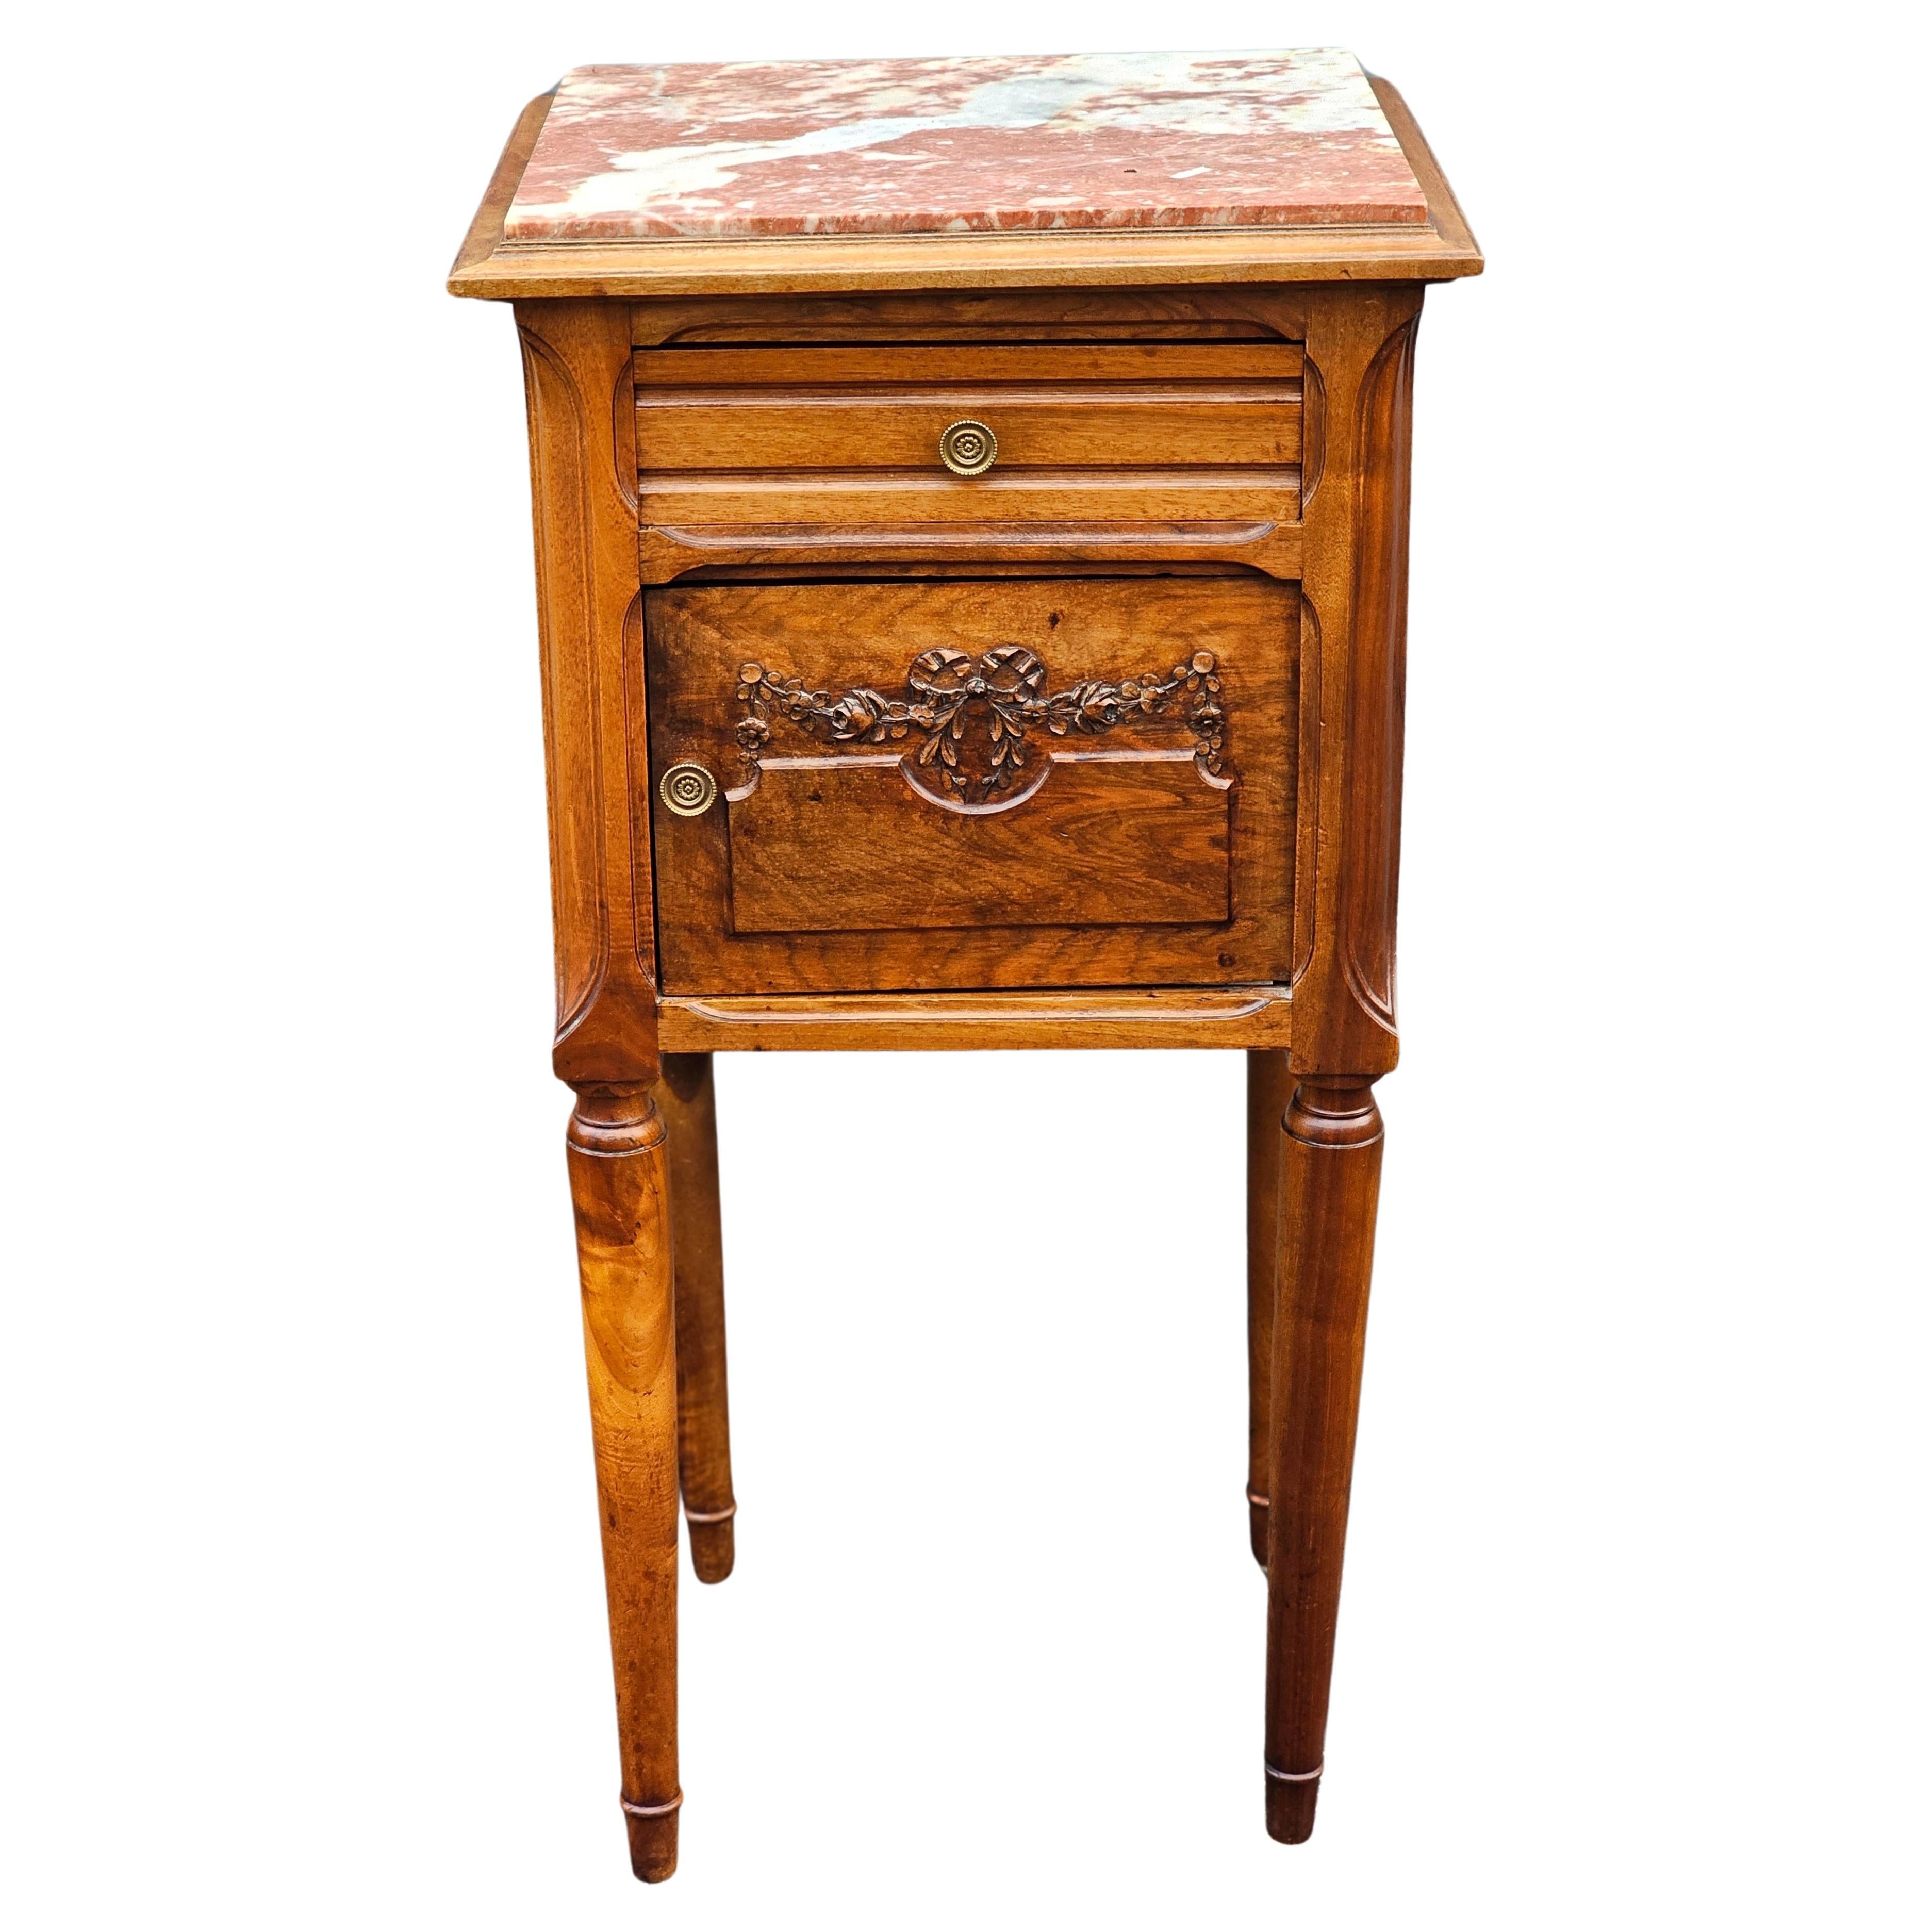 Arts & Crats Transitional Walnut, Marble Top and Porcelain Humidor Side Table.
Measures 17